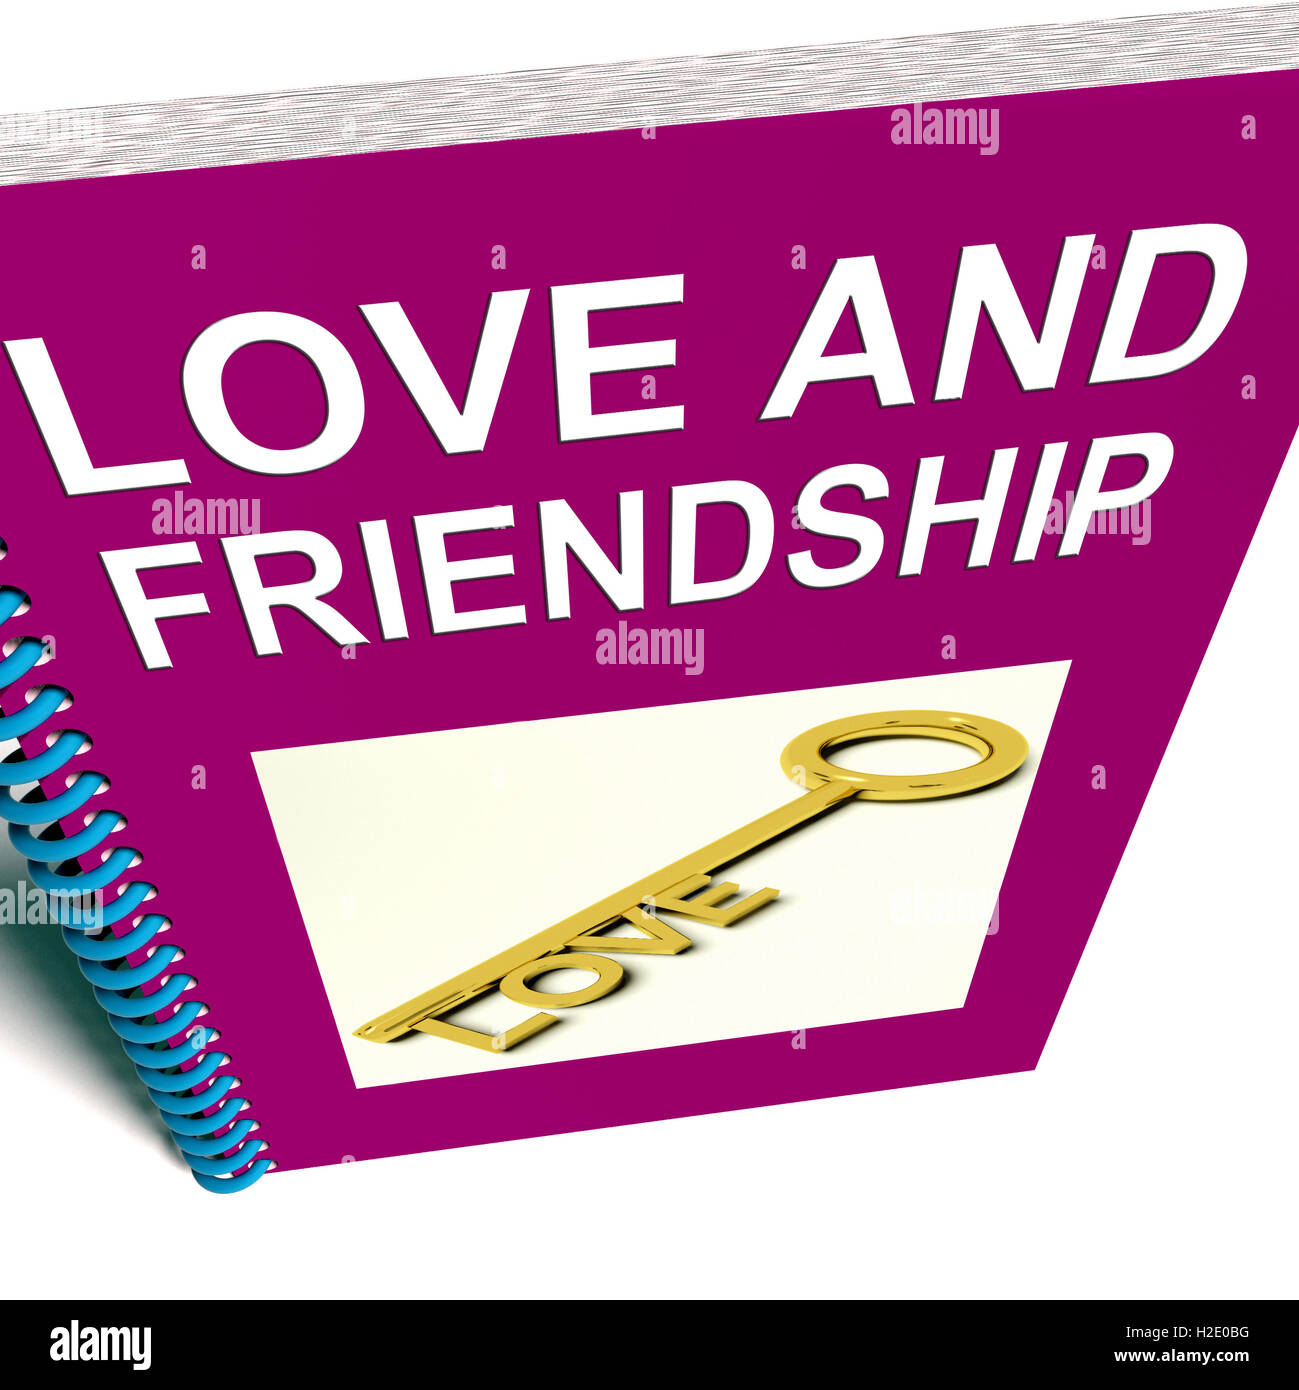 Love and Friendship Book Represents Keys and Advice for Friends Stock Photo